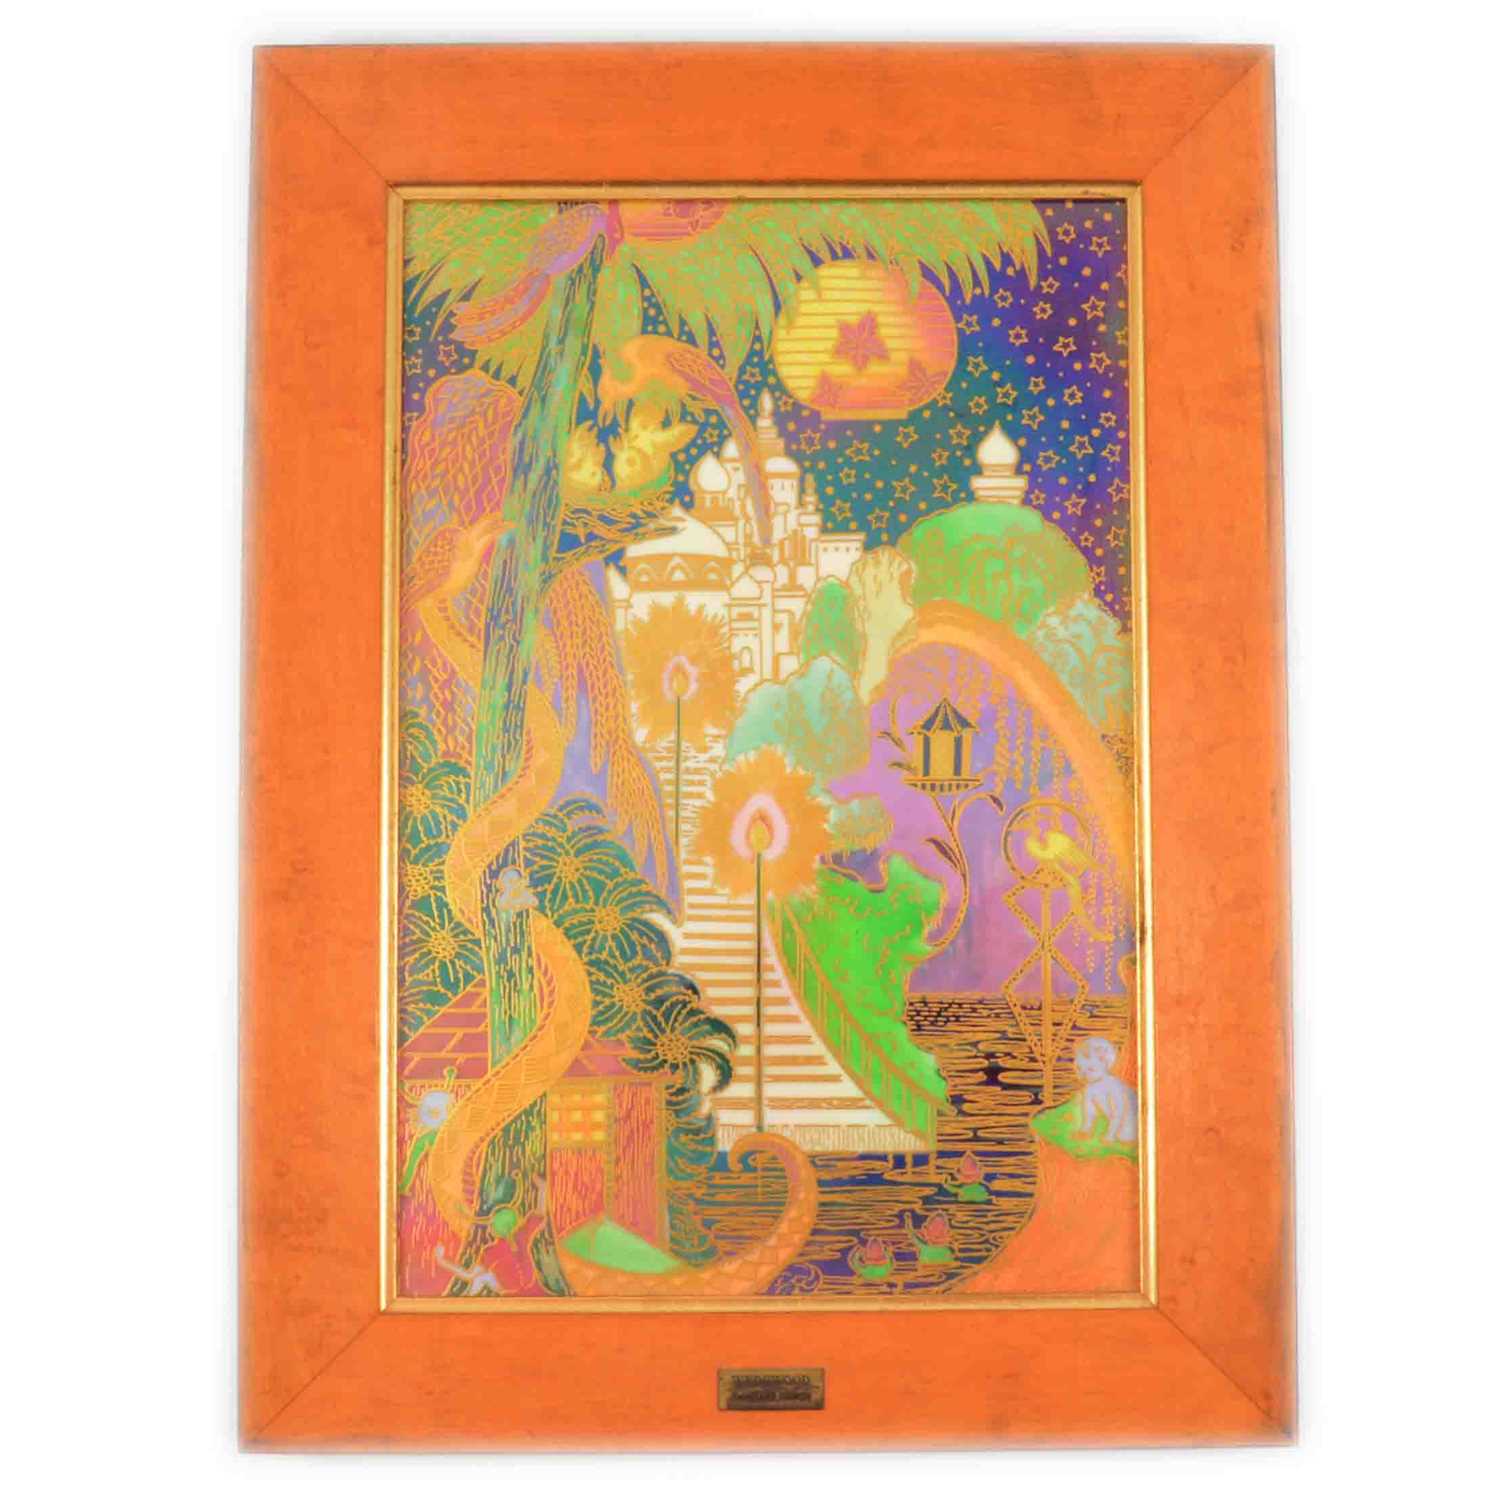 Lot 195 - Wedgwood Limited Edition "Enchanted Palace" Fairyland lustre ceramic plaque, 1980s